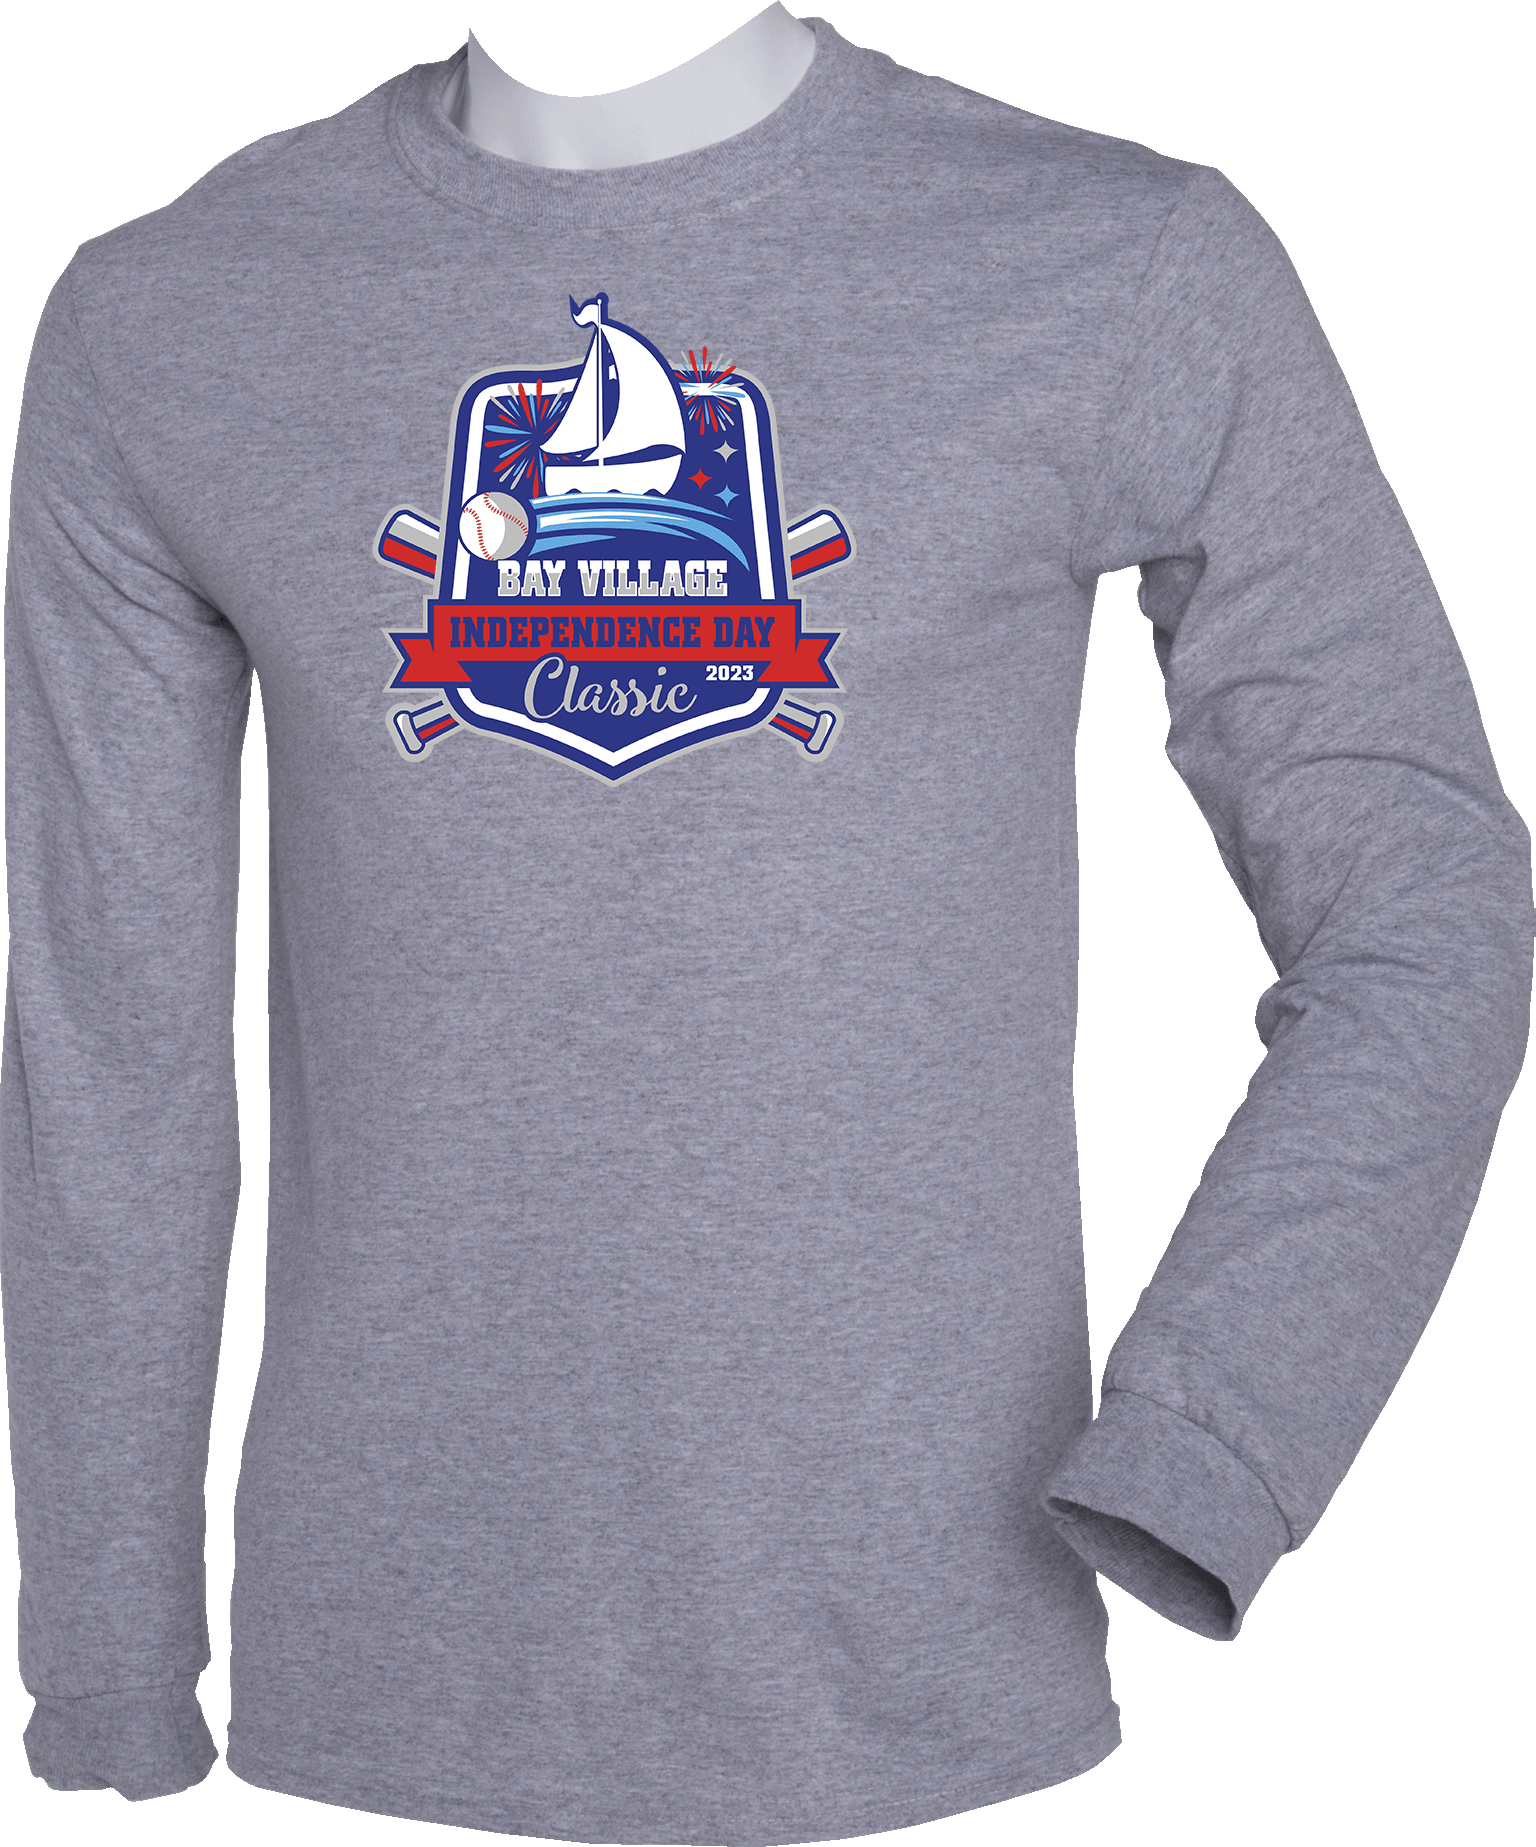 LONG SLEEVES - 2023 Bay Village Independence Day Classic